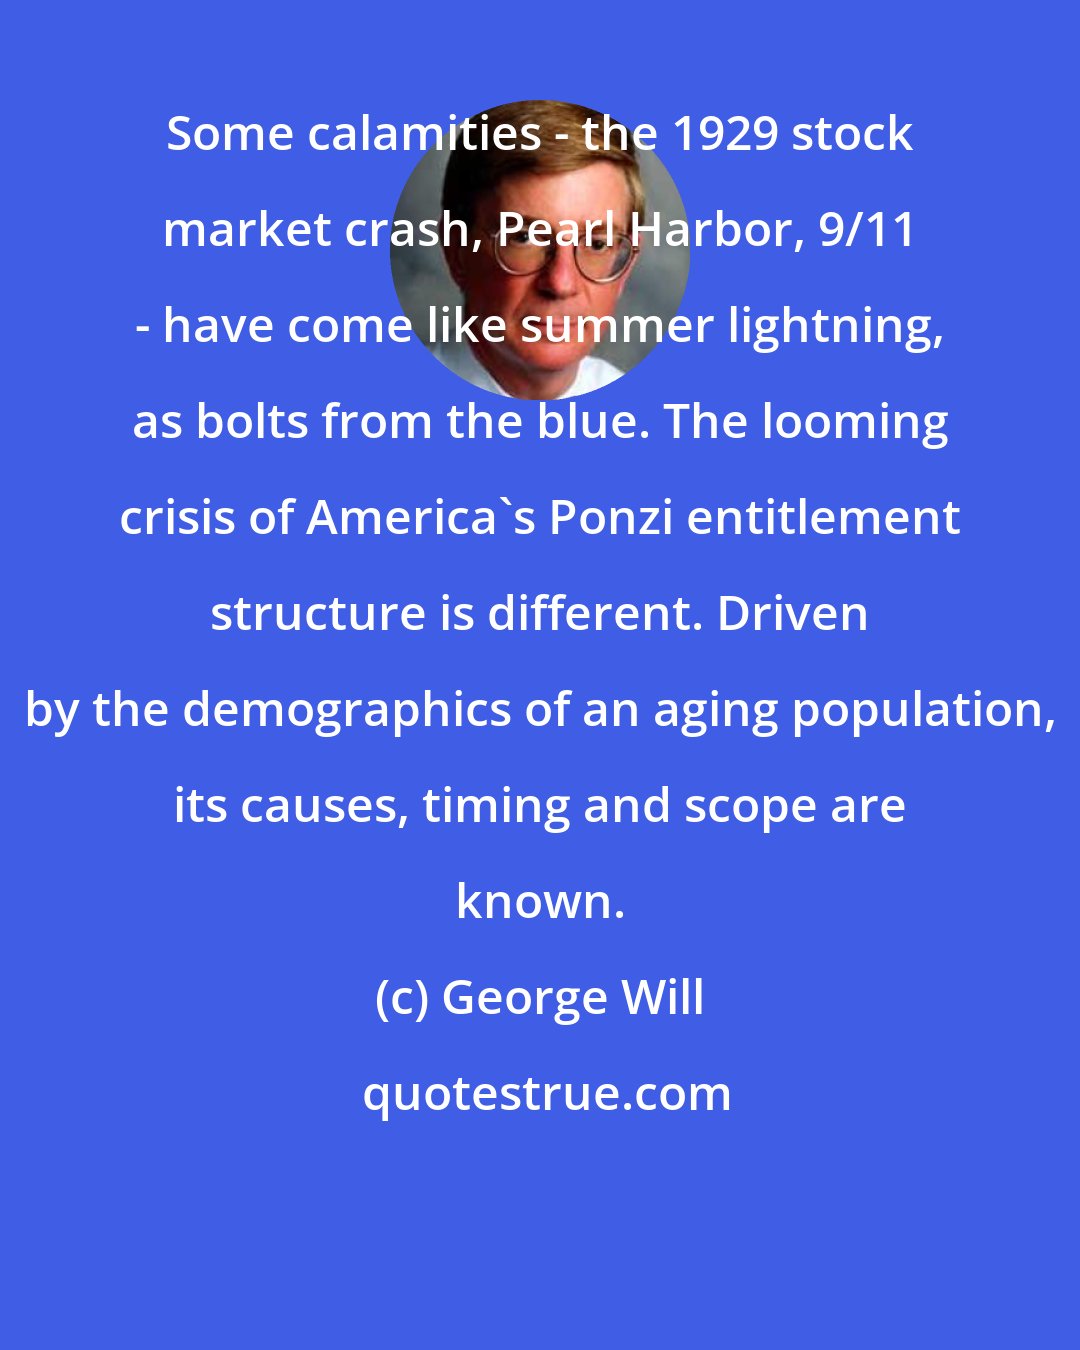 George Will: Some calamities - the 1929 stock market crash, Pearl Harbor, 9/11 - have come like summer lightning, as bolts from the blue. The looming crisis of America's Ponzi entitlement structure is different. Driven by the demographics of an aging population, its causes, timing and scope are known.